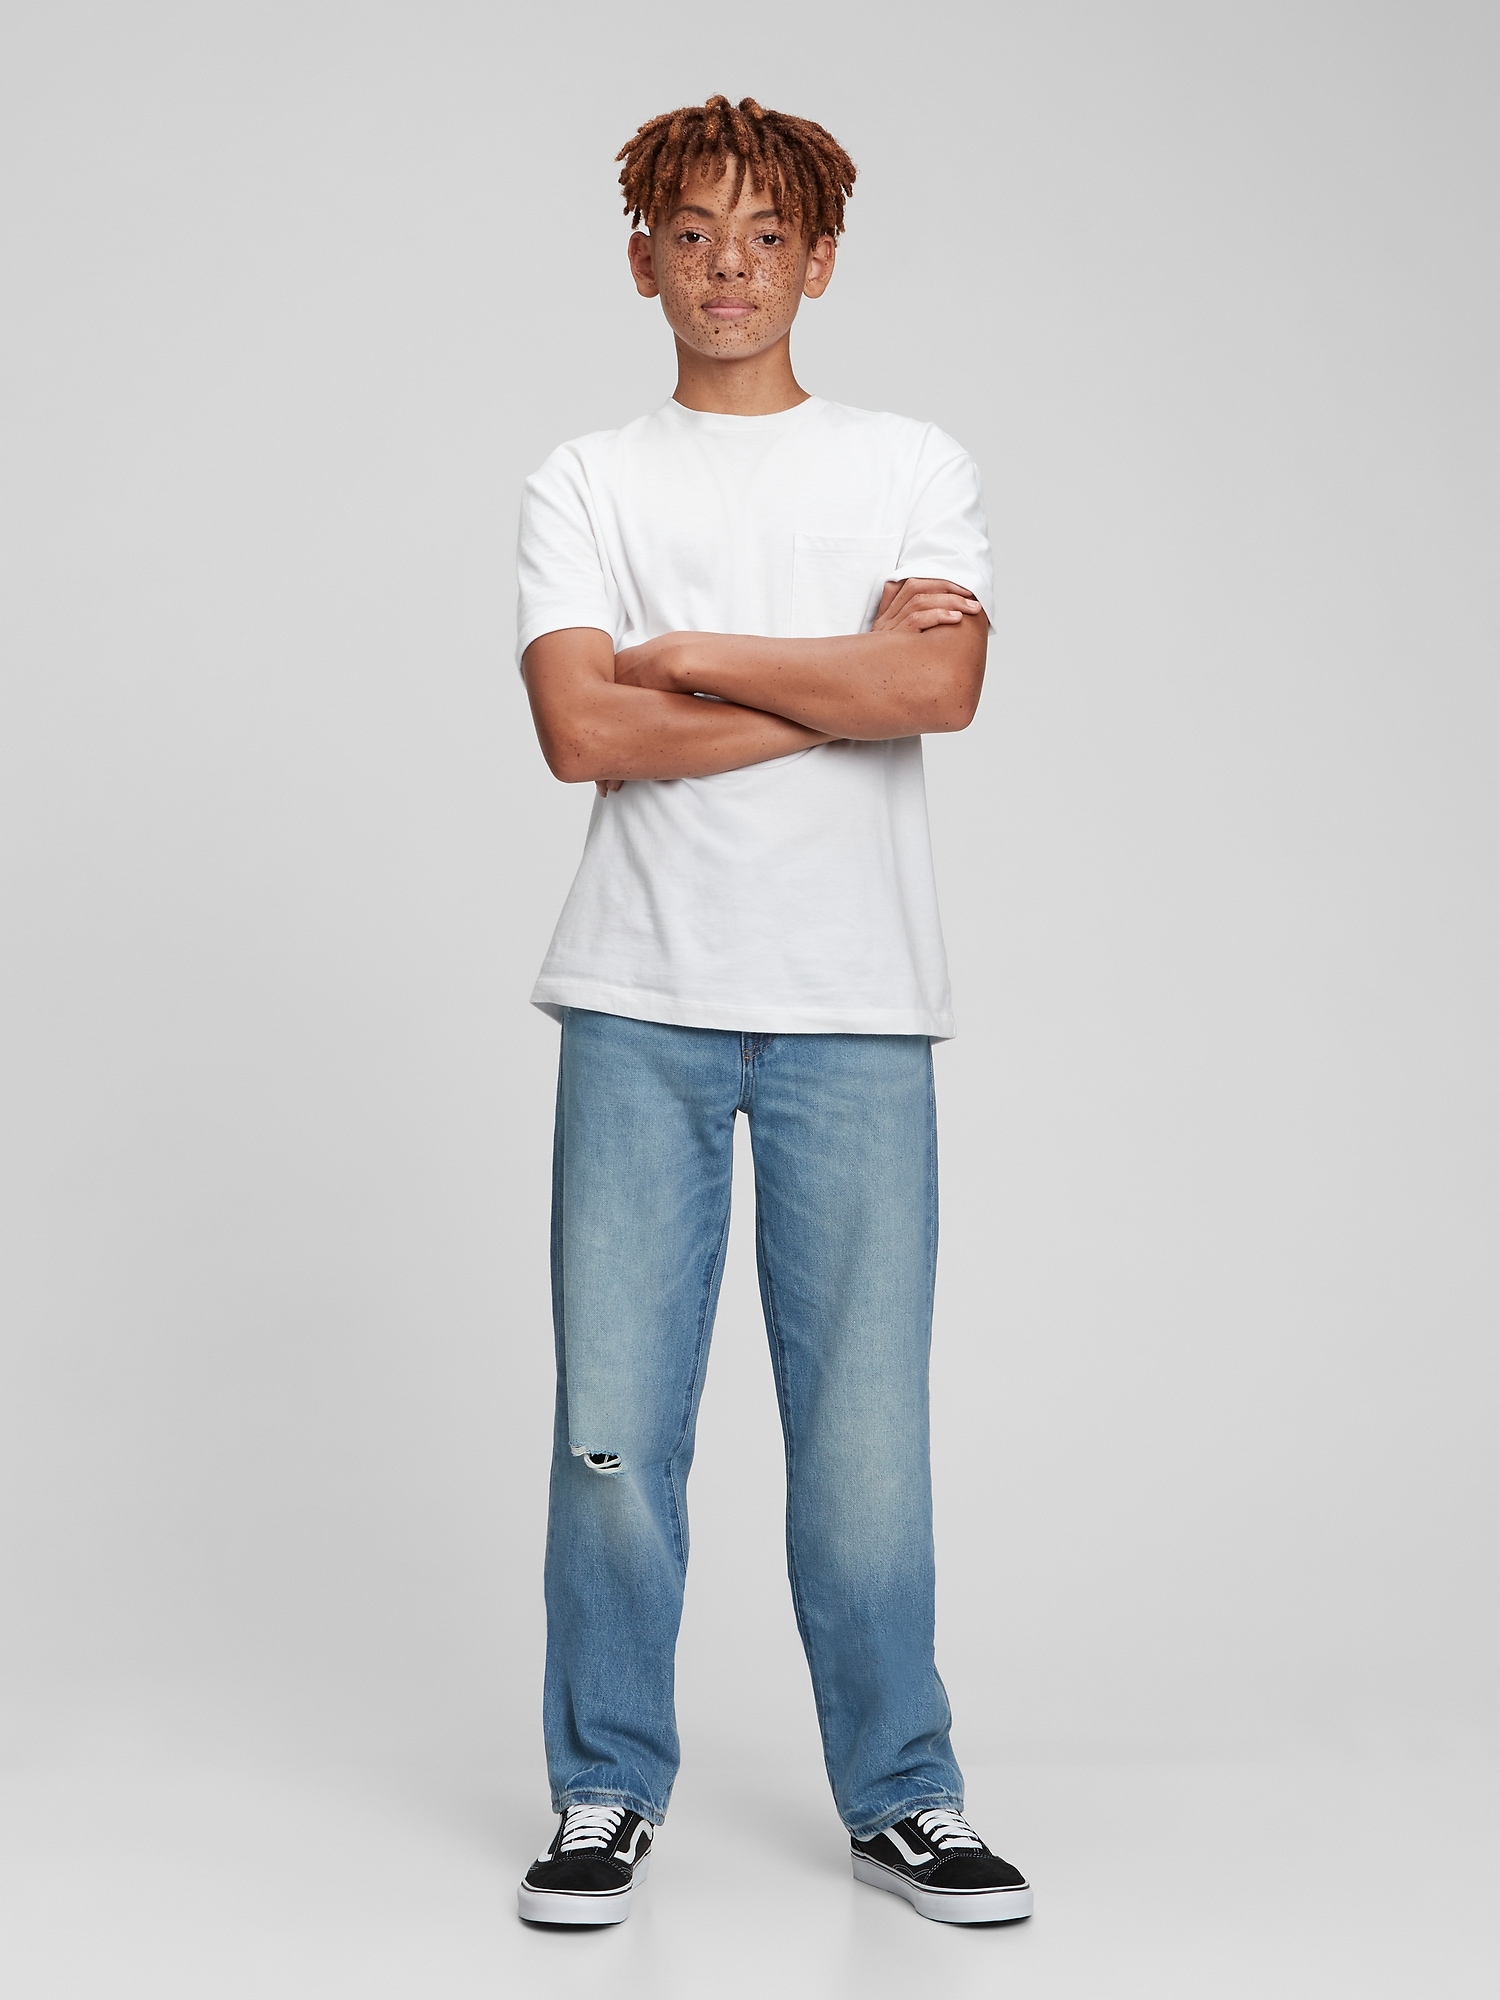 Gap Teen Original Fit Jeans with Washwell blue - 824649002